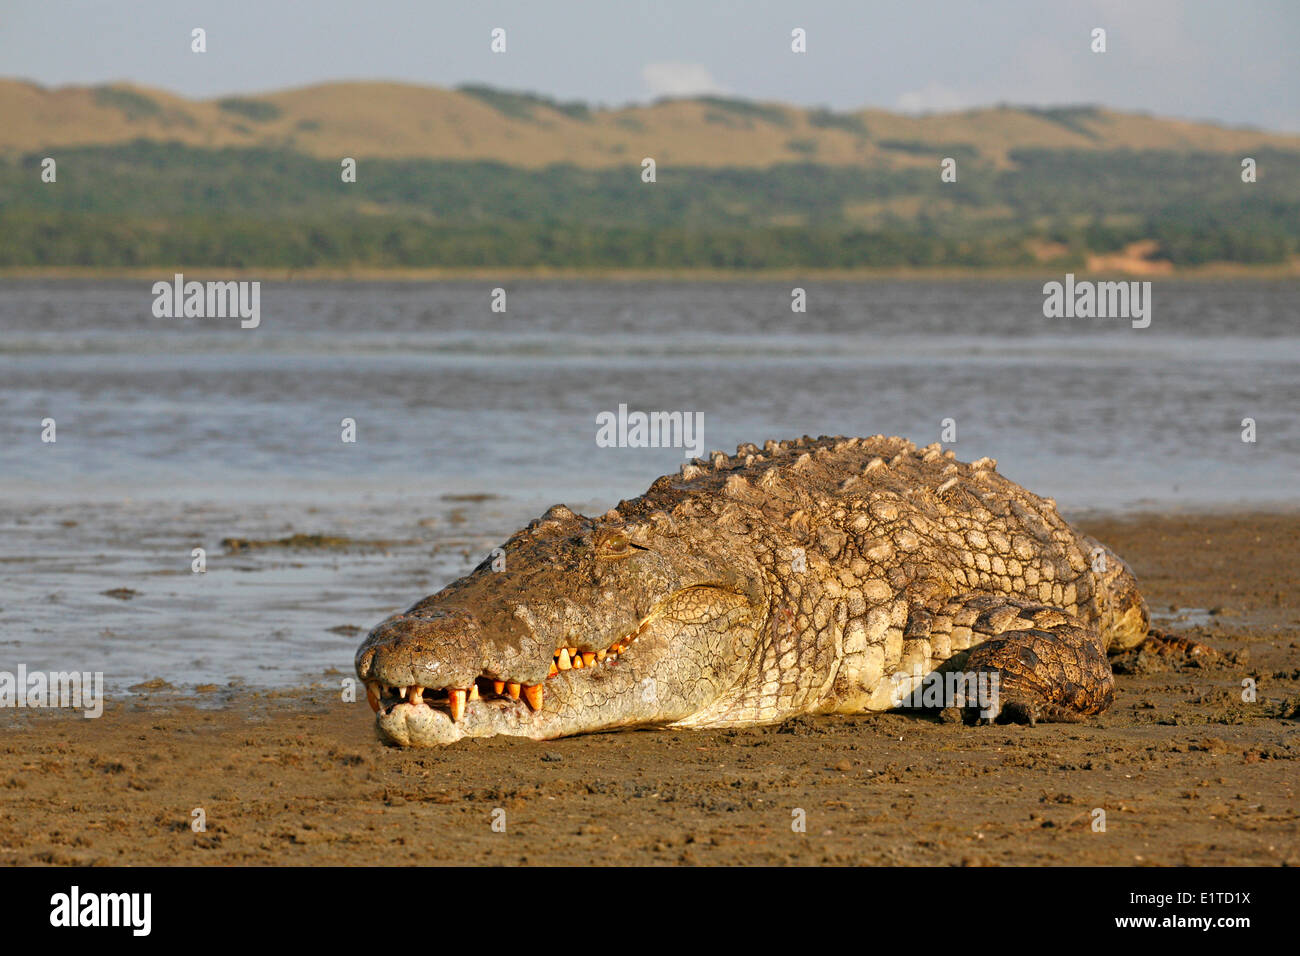 photo of a large nile crocodile lying at the edge of the water with the estuary in the background Stock Photo